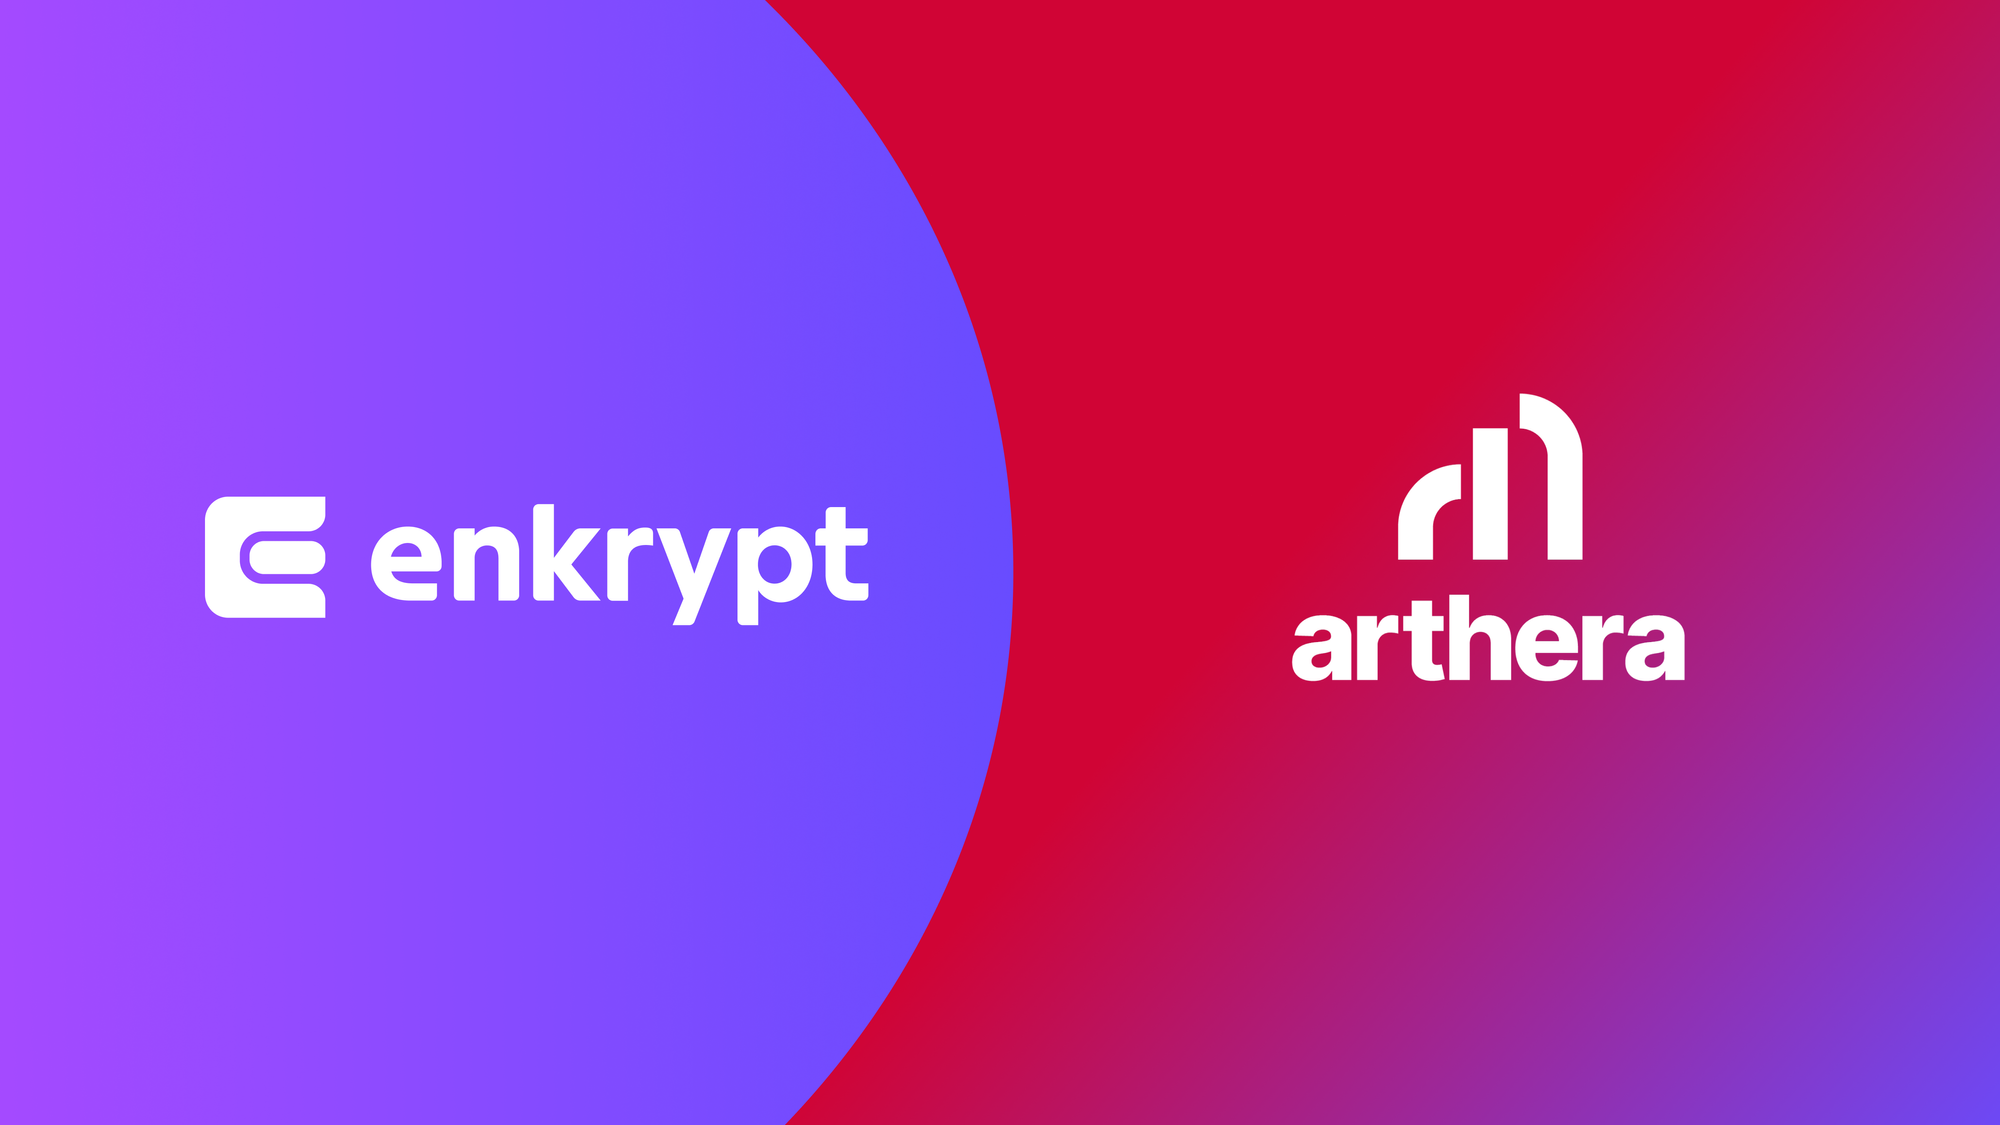 Interact with Arthera using Enkrypt